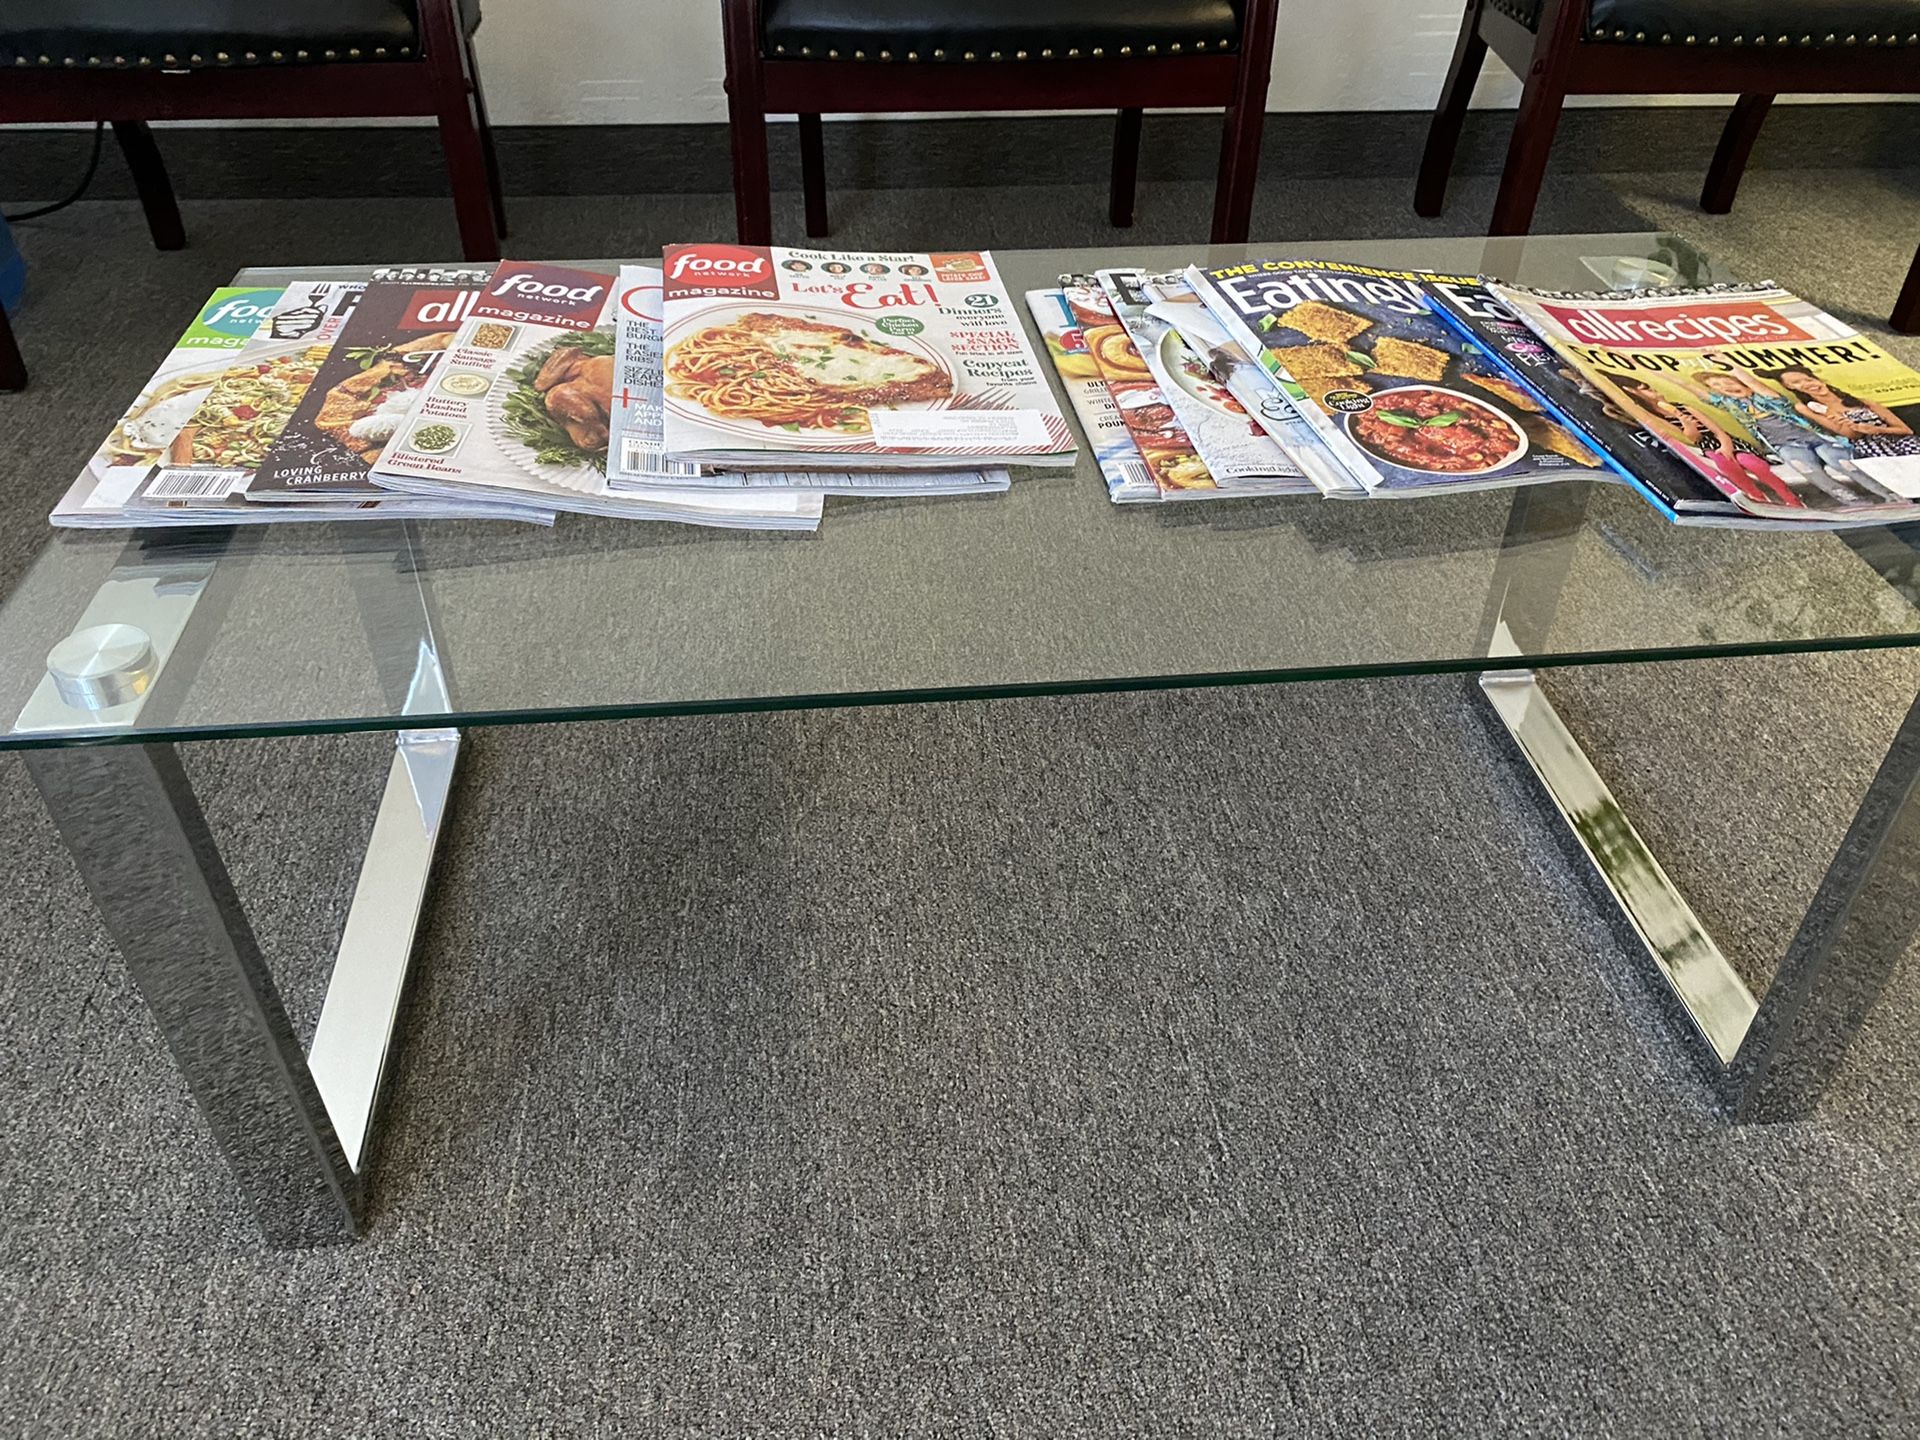 Small center table